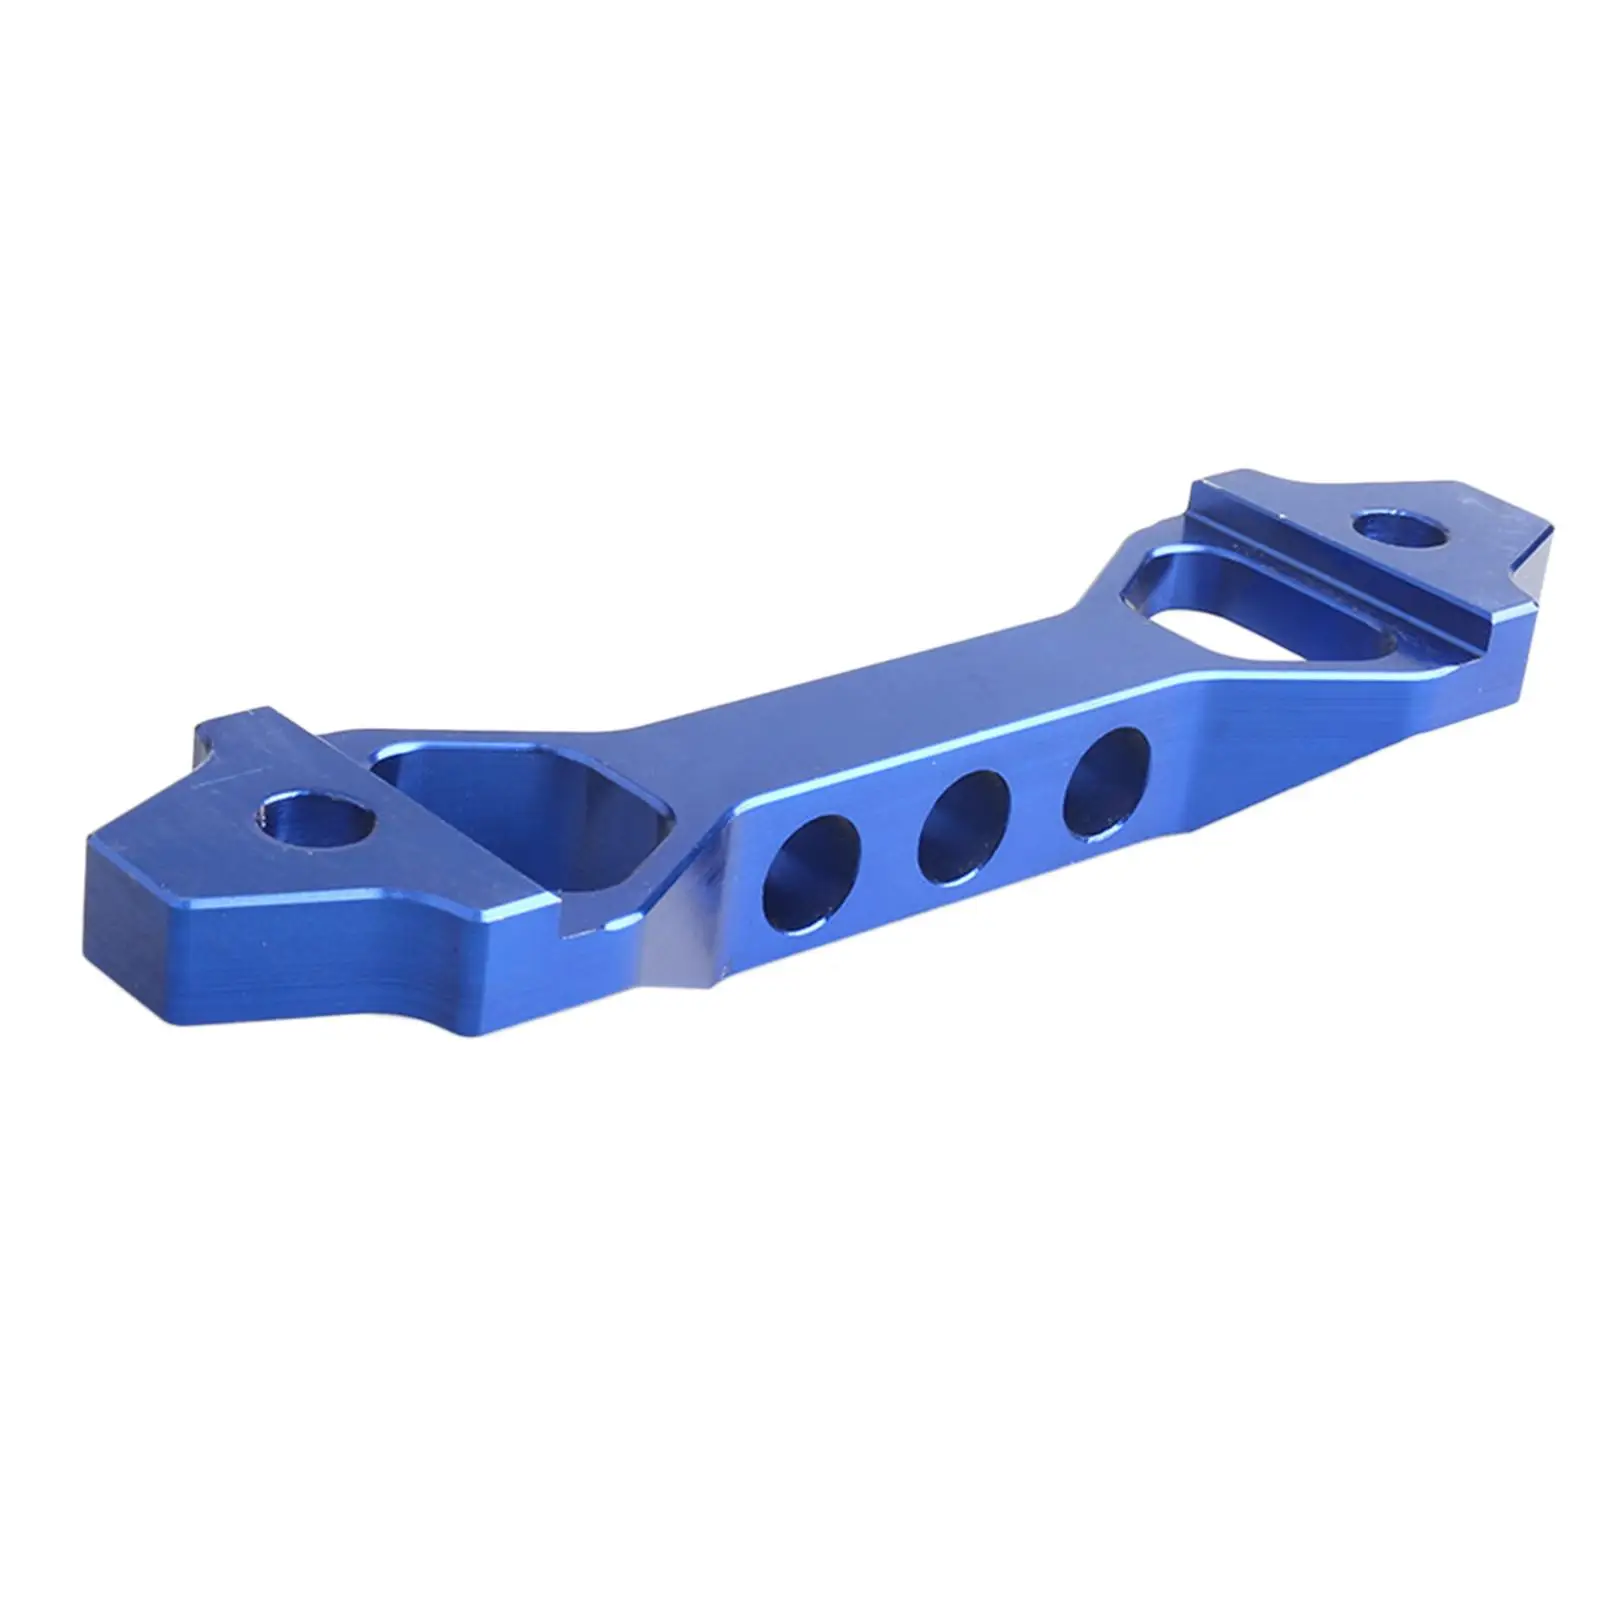 Battery tie, Replacement Spare Parts, Anodized Aluminum Alloy, Mount Bracket Holder Mounting Board Fit for  RC Truck  Car